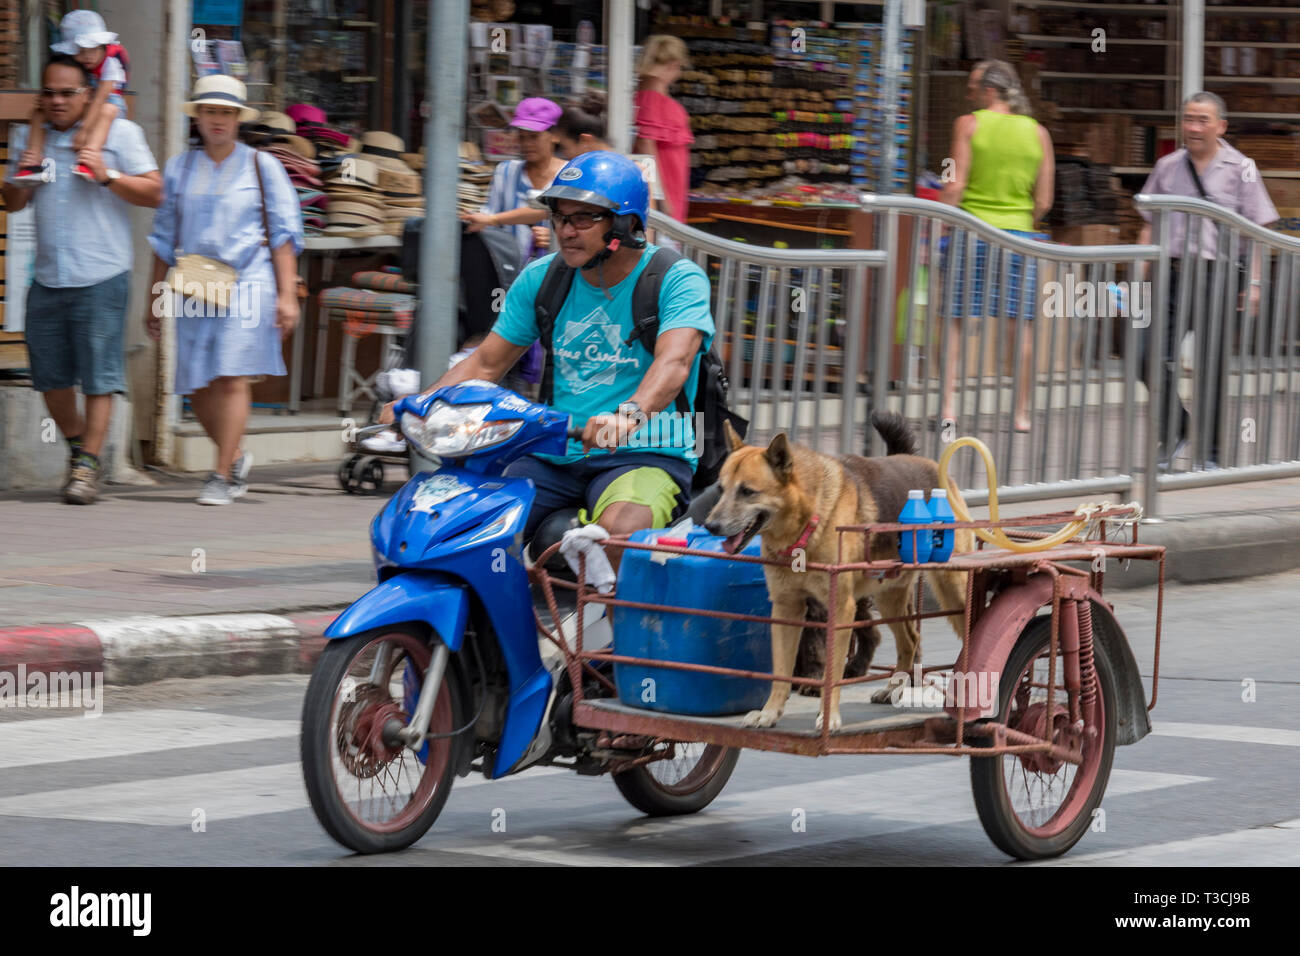 a an riding a motorcycle through the centre of Phuket in Thailand with a dog sitting in a sidecar, Stock Photo